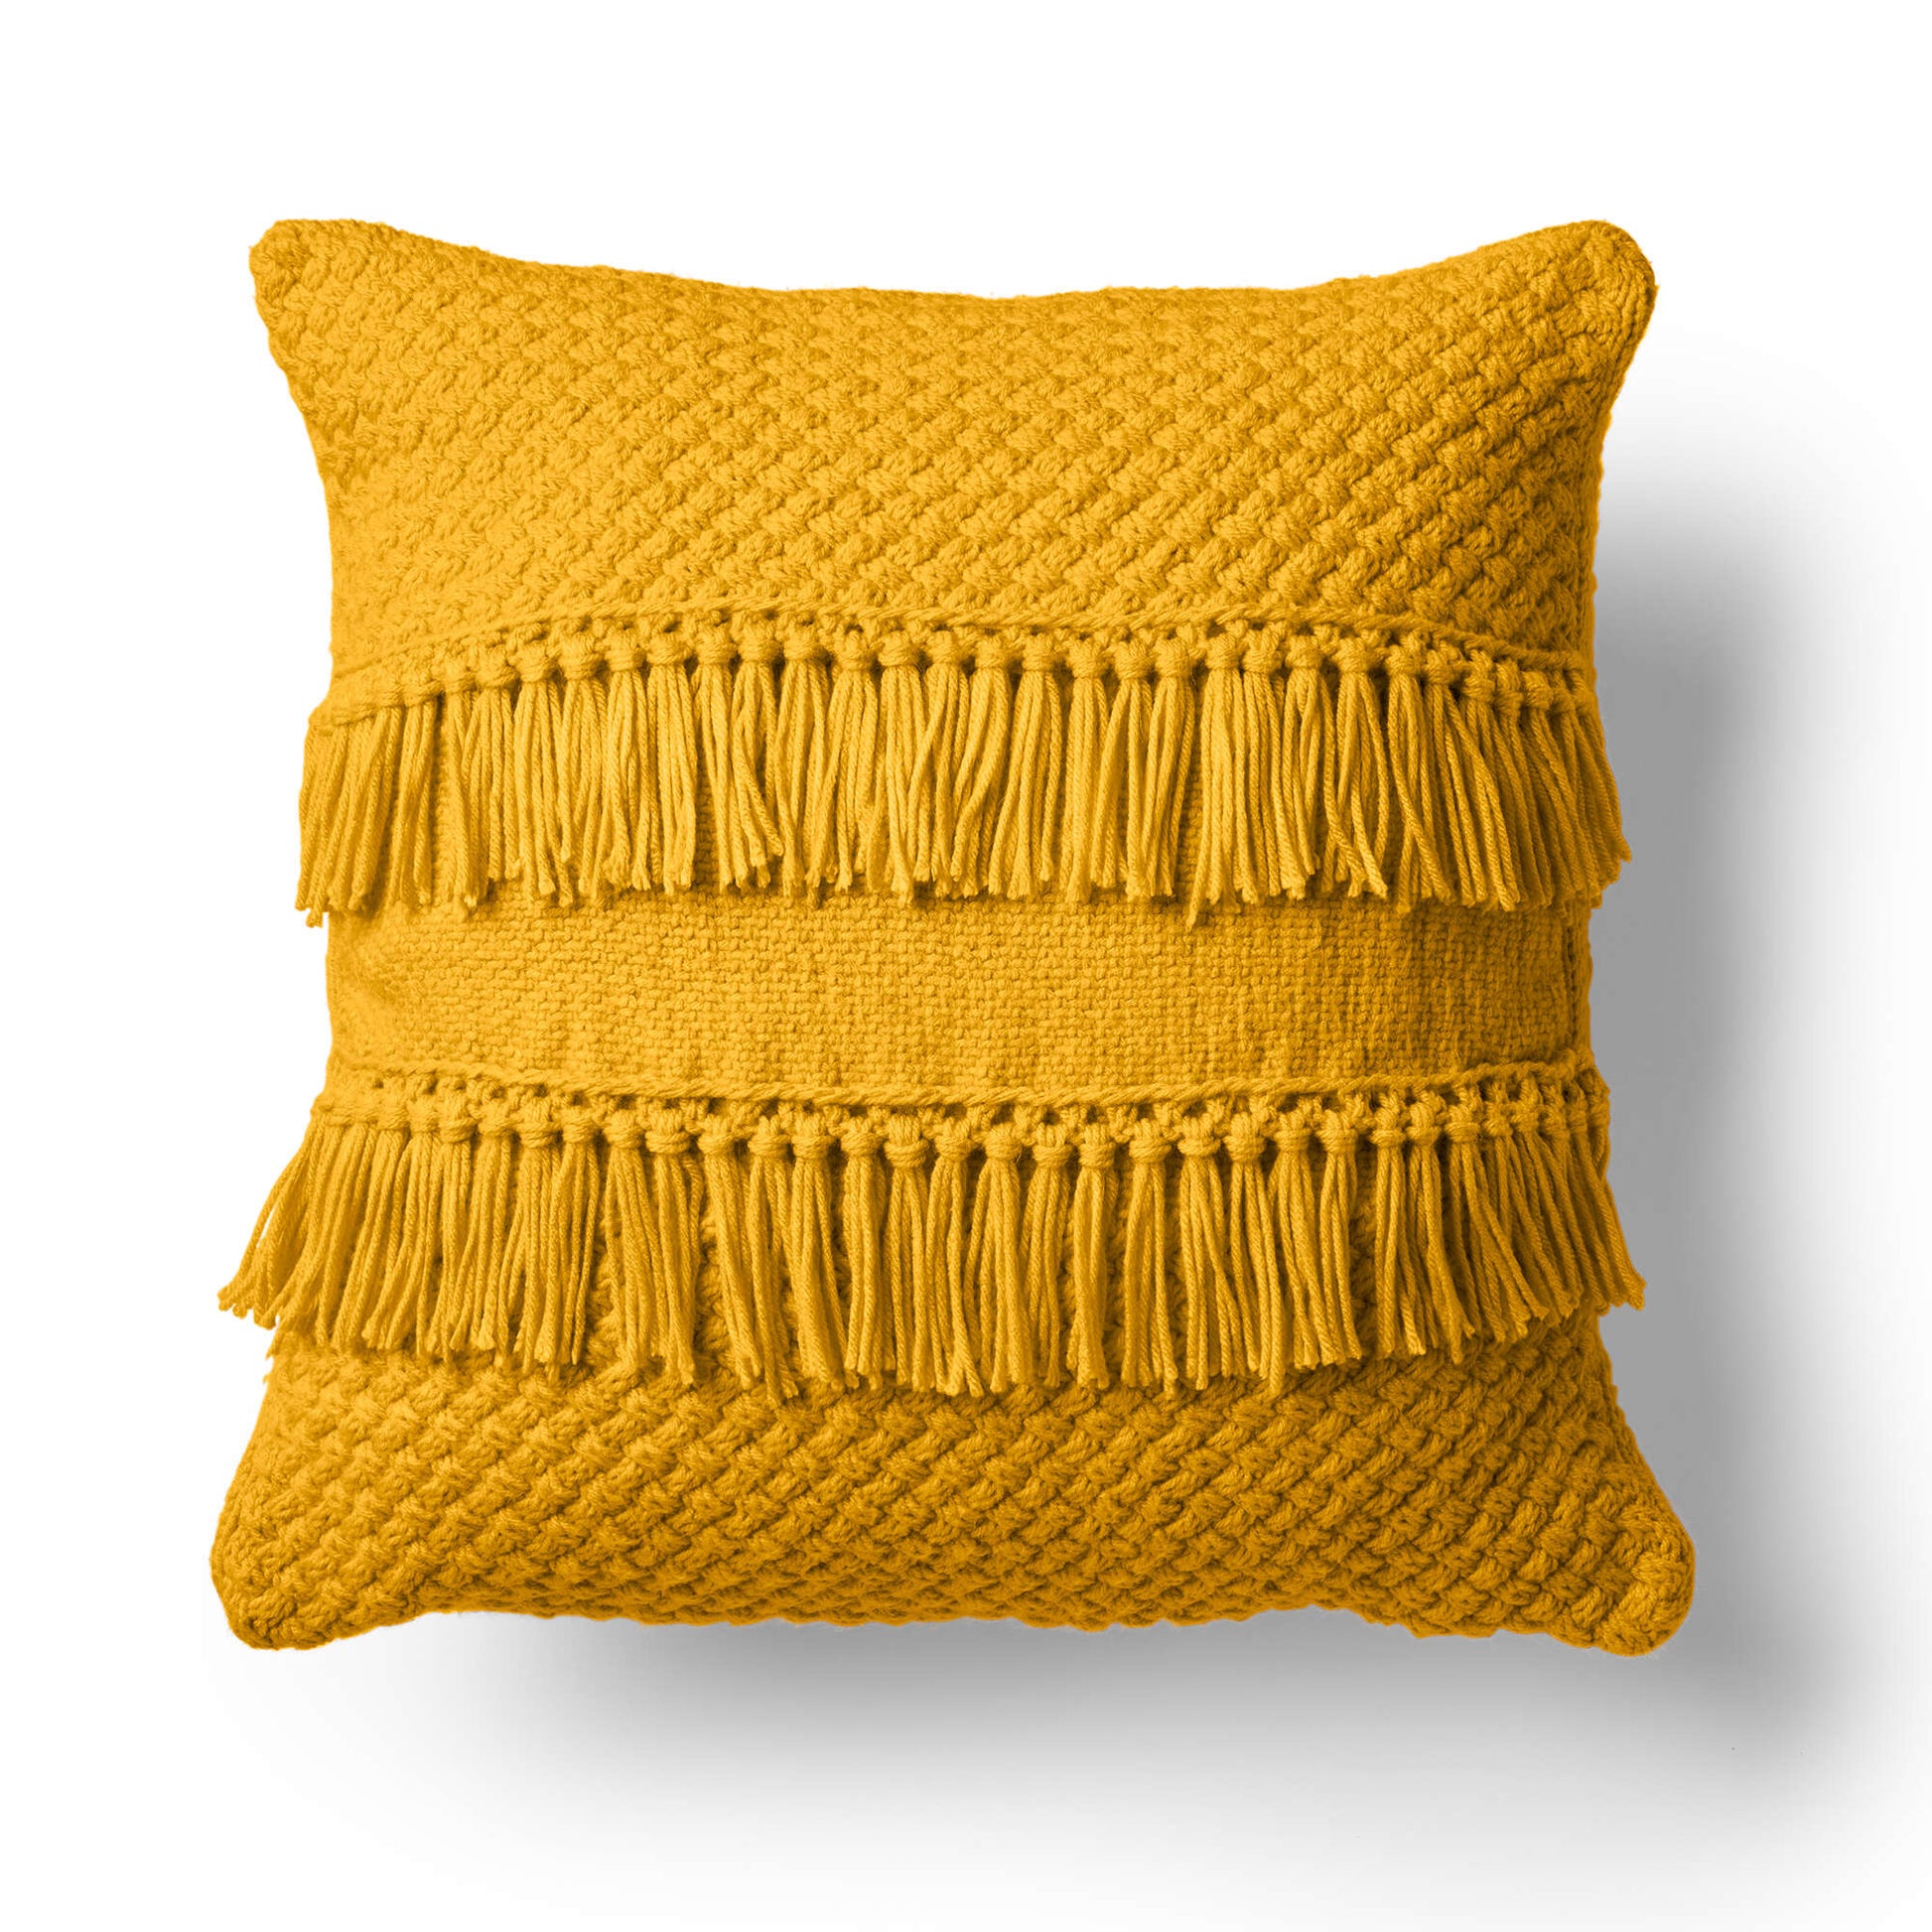 Free Caron Texture And Fringe Knit Pillow Pattern